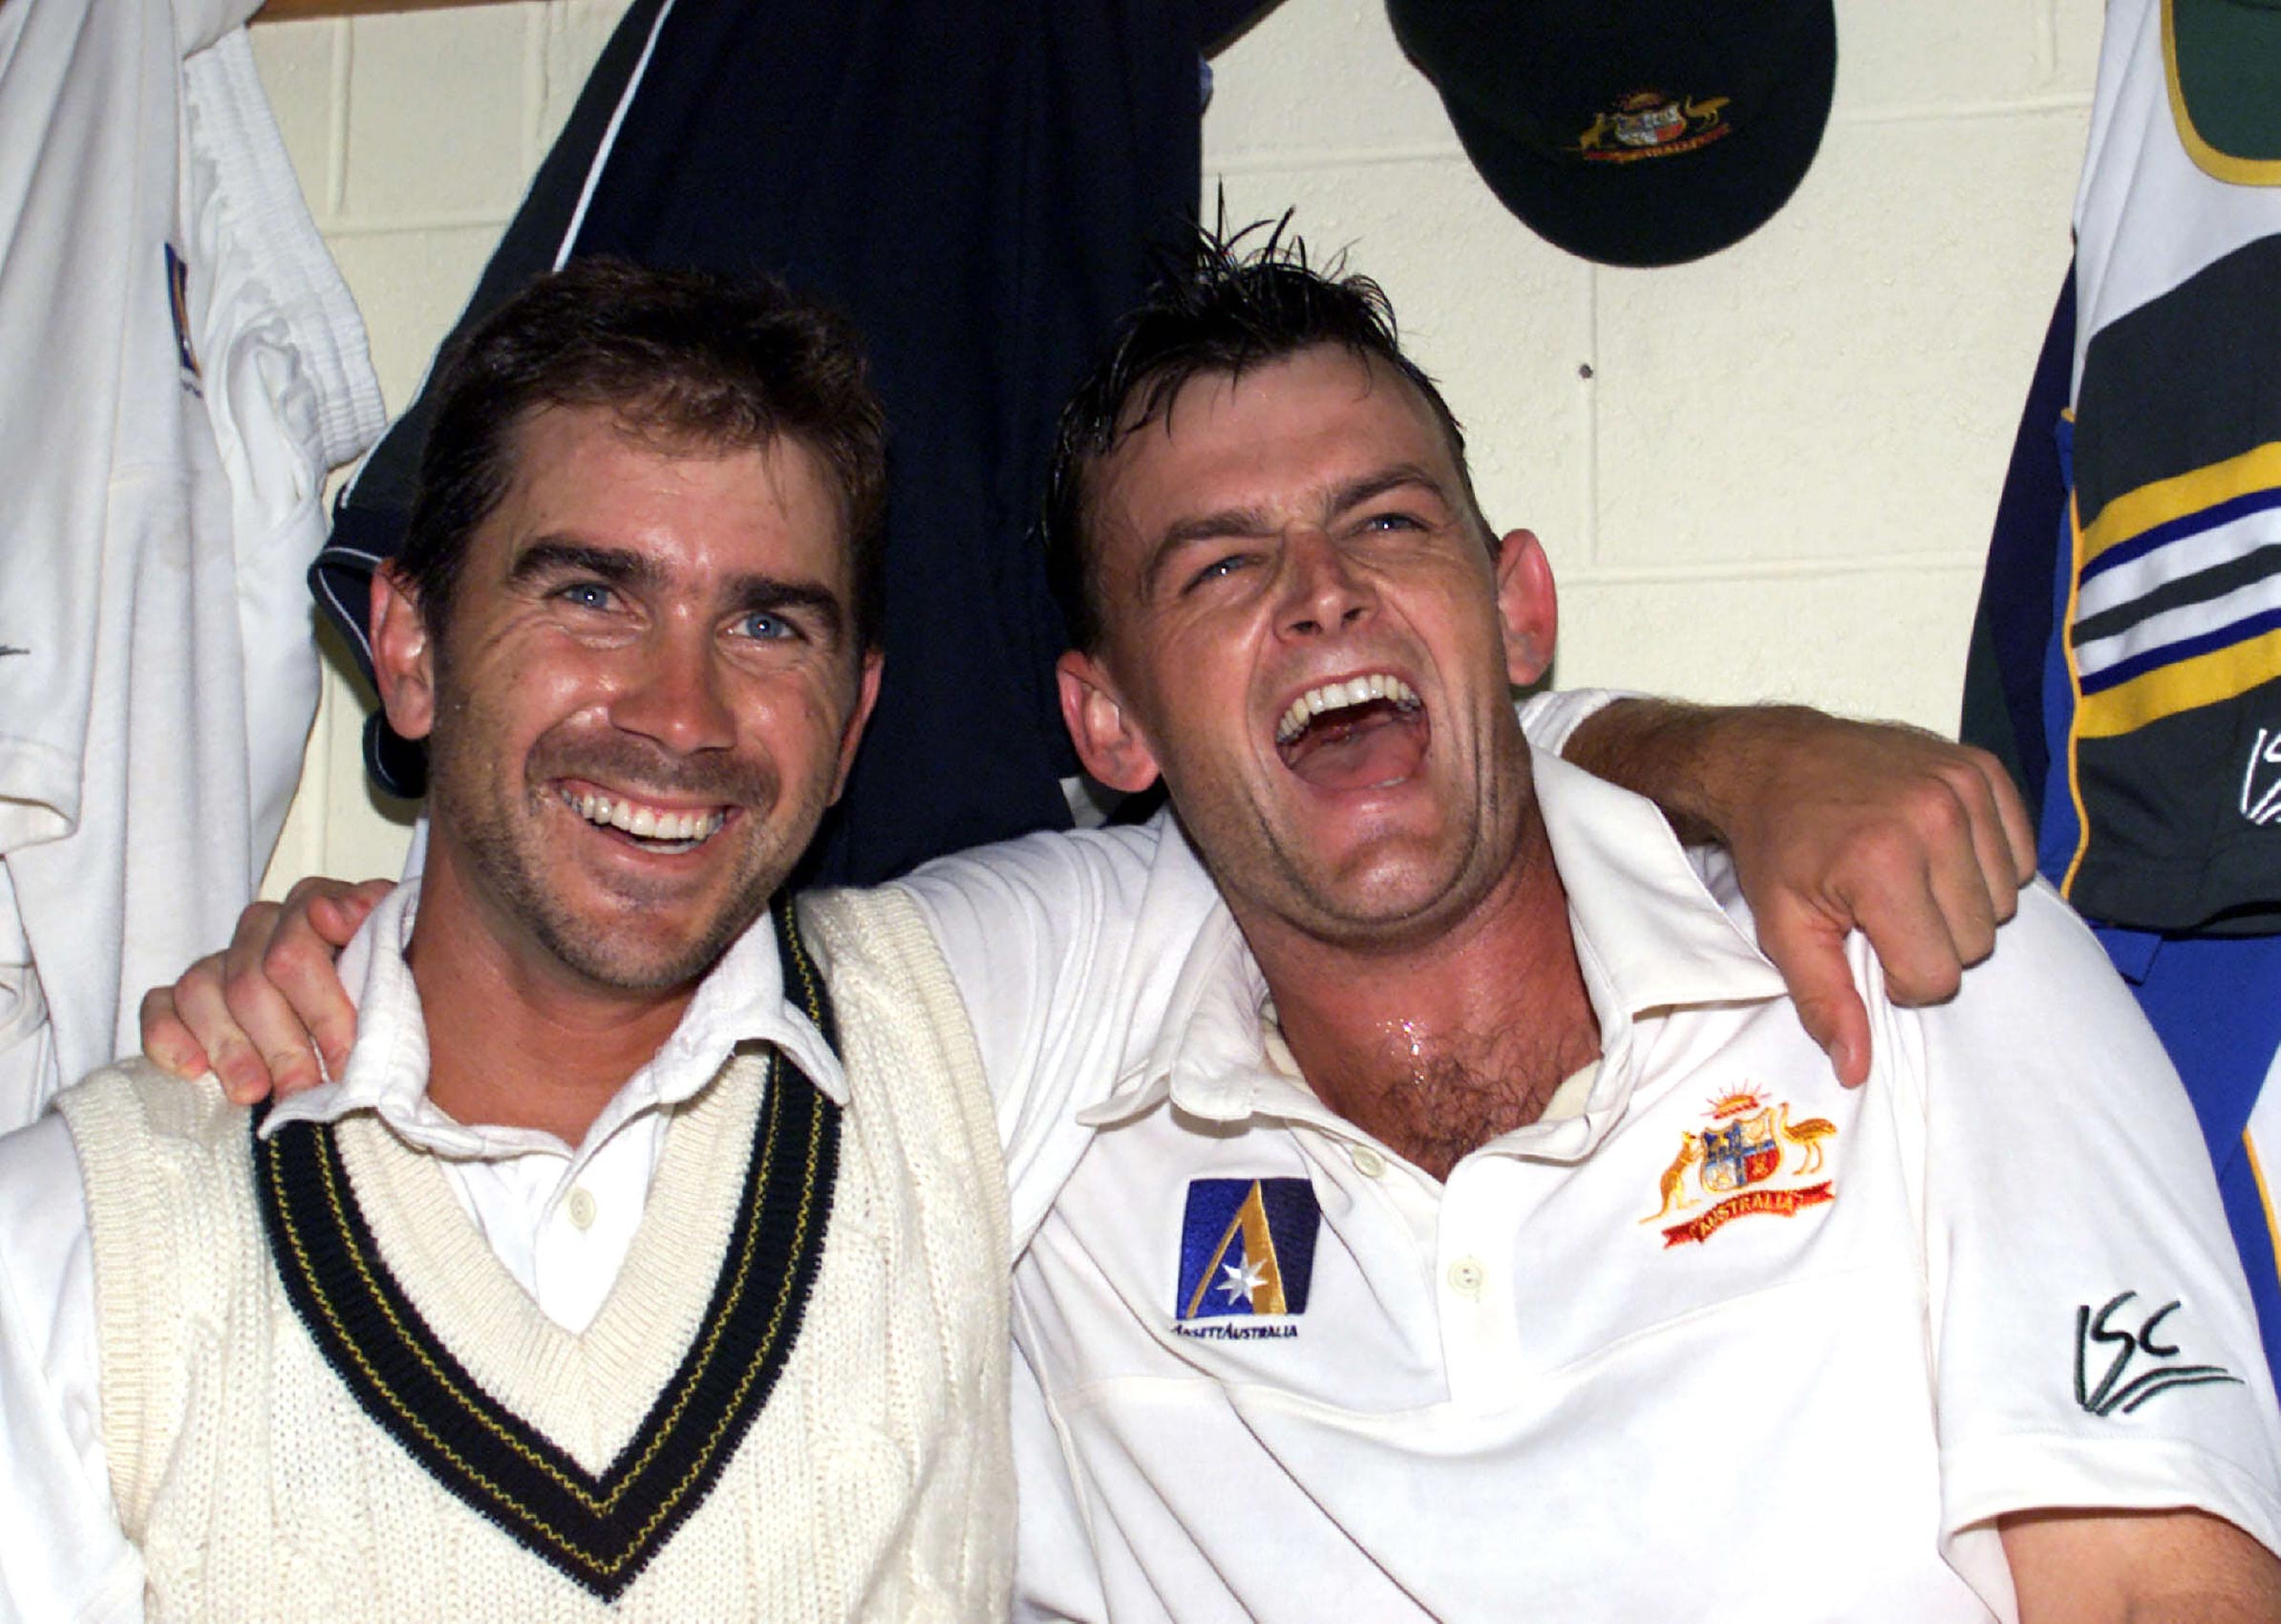 Cricketer Justin Langer with Adam Gilchrist celebrating their victory.
Cricket - Australia vs Pakistan fifth day of Second Test match in Hobart 21 Nov 1999.